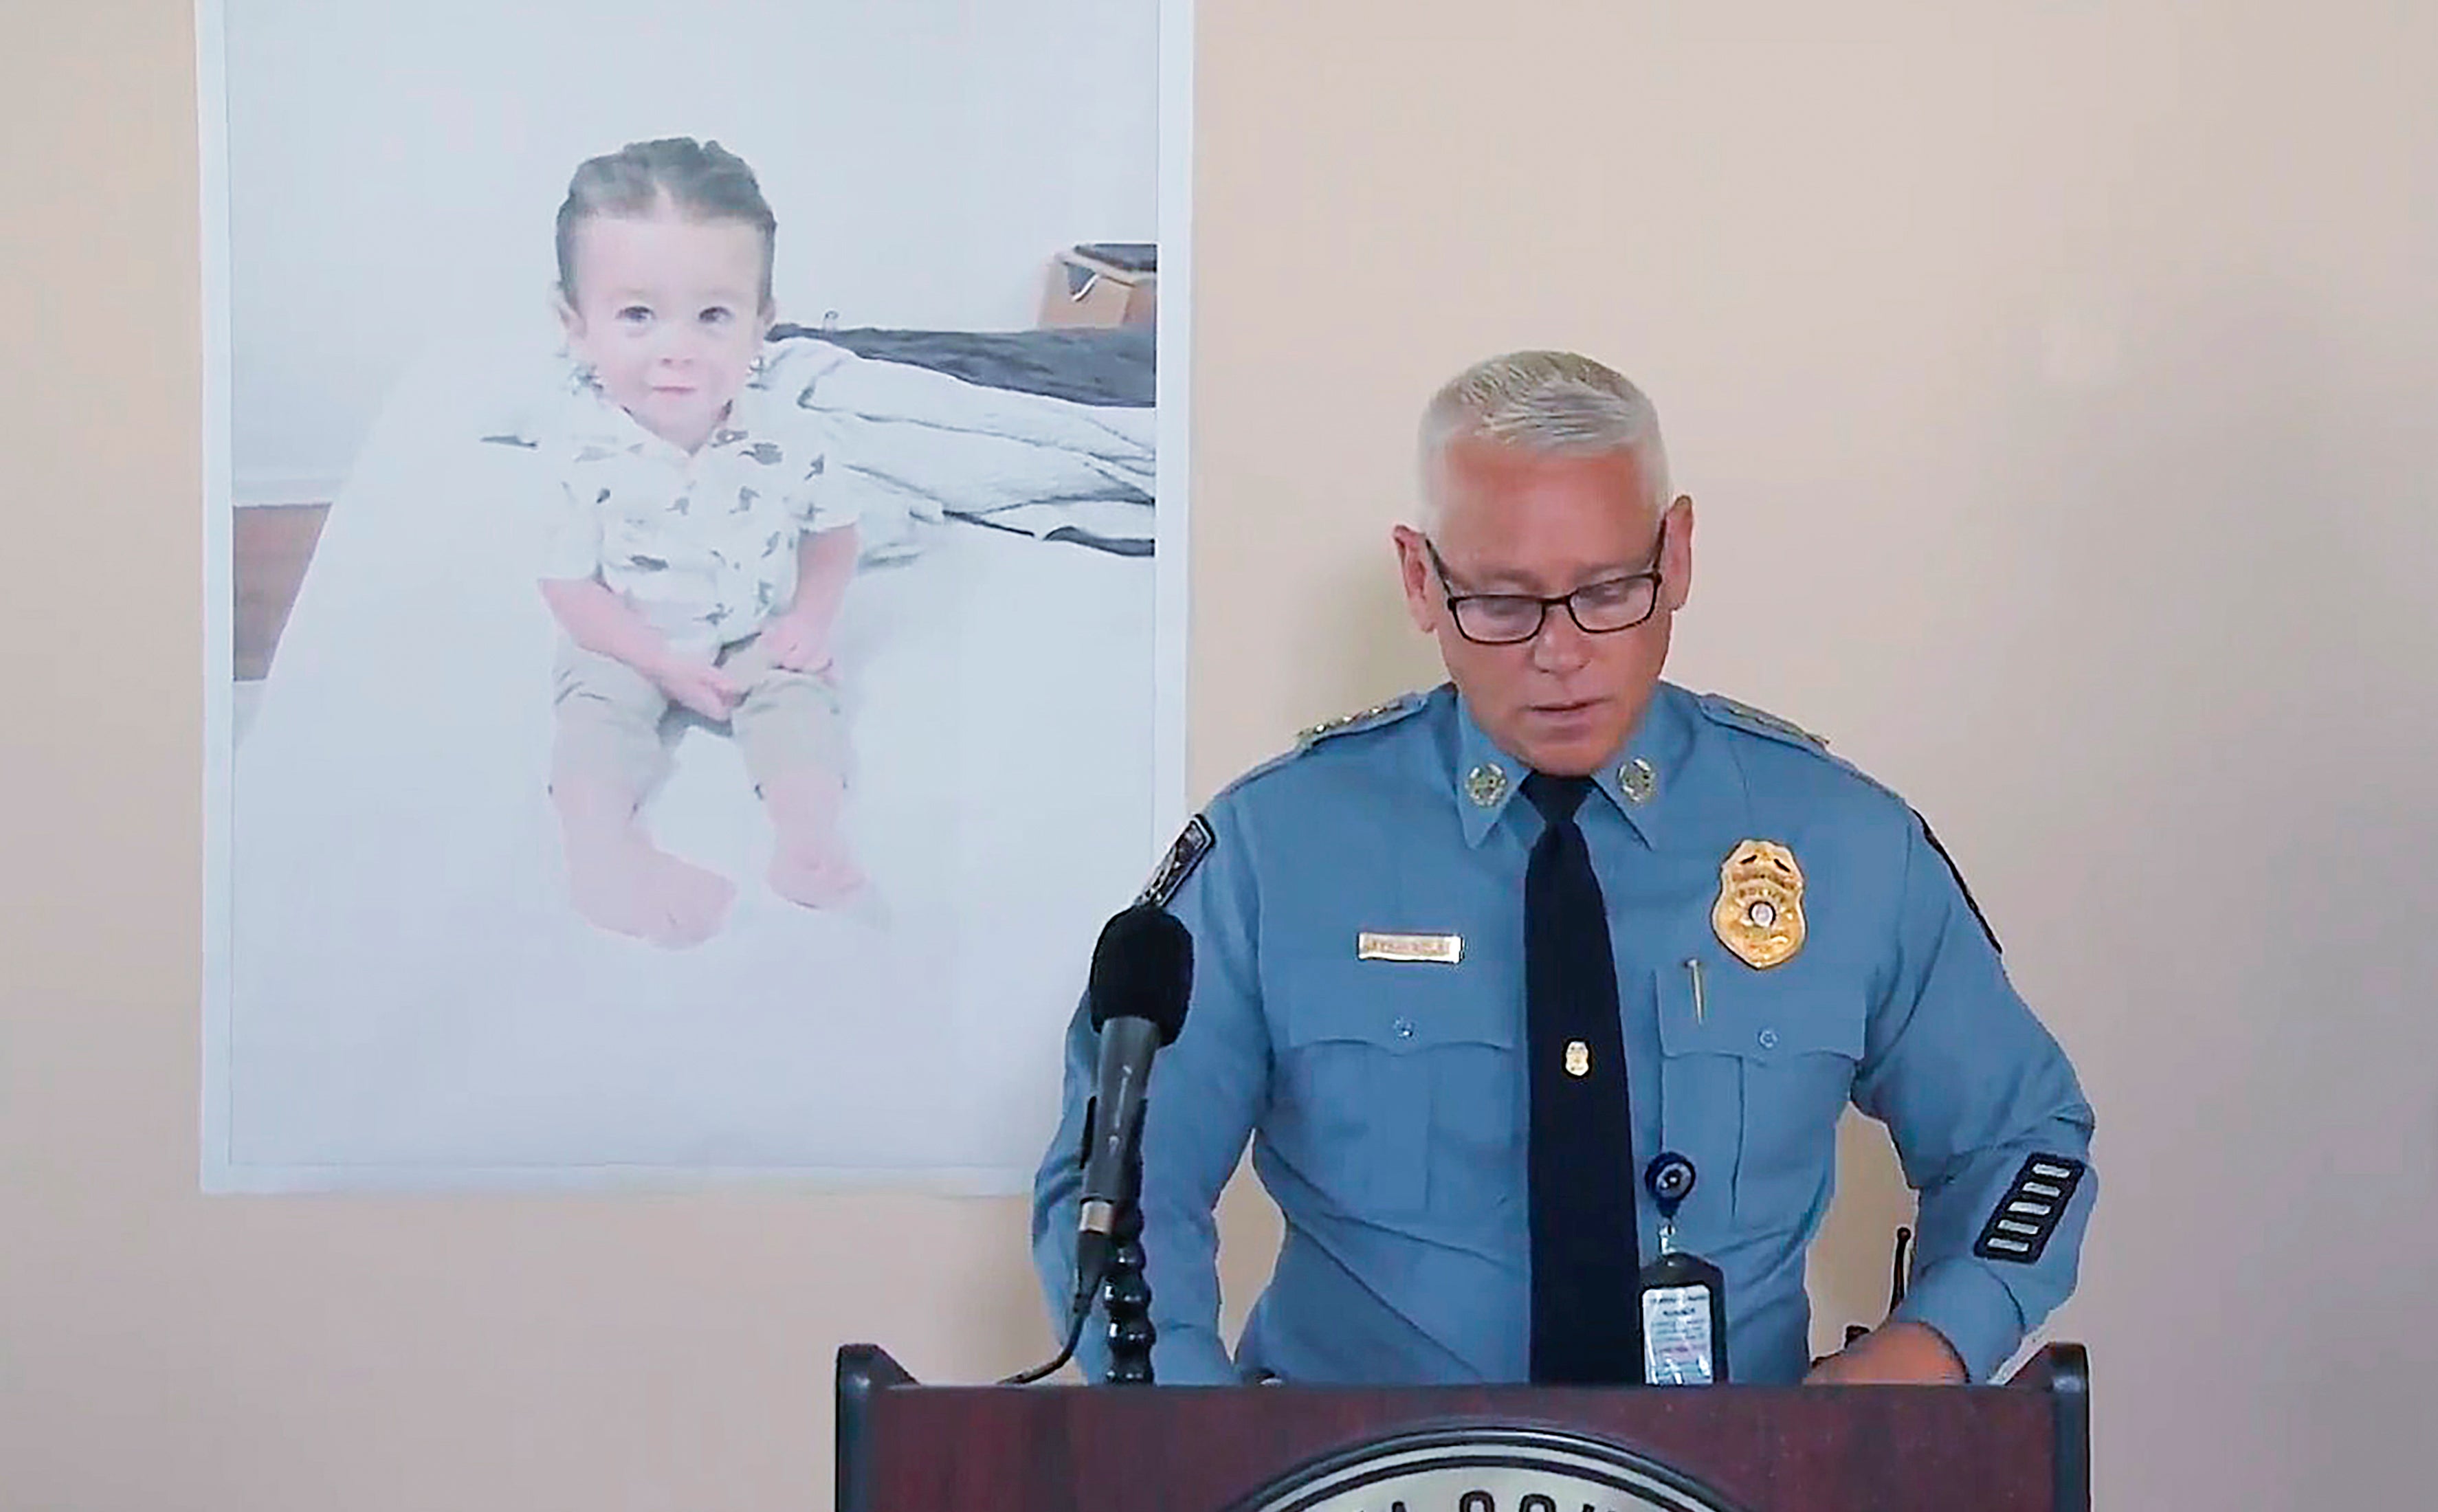 Police Chief Jeff Hadley speaks to reporters as he stands in front of a large photo of toddler Quinton Simon before the boy’s remains were found at a Georgia landfill